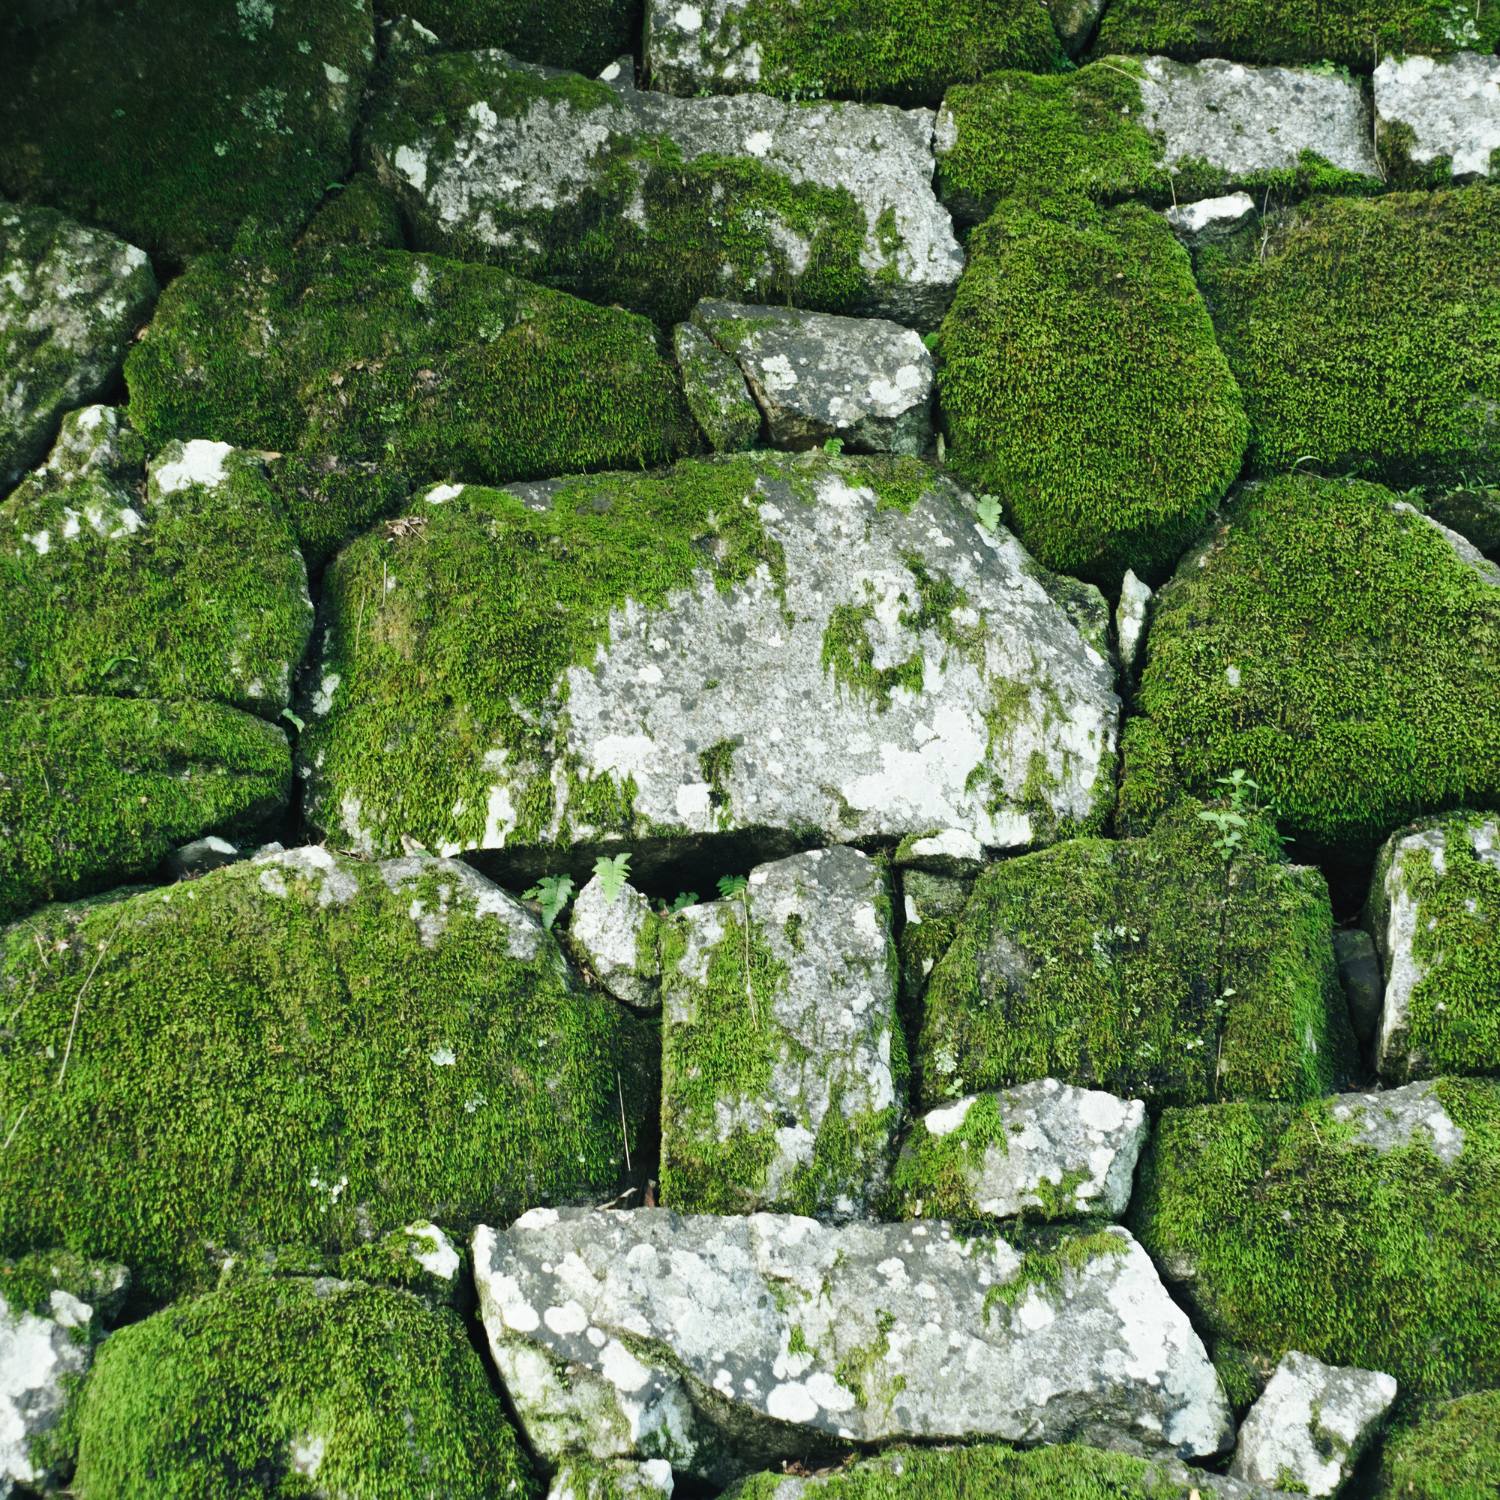 Moss growing on a wall